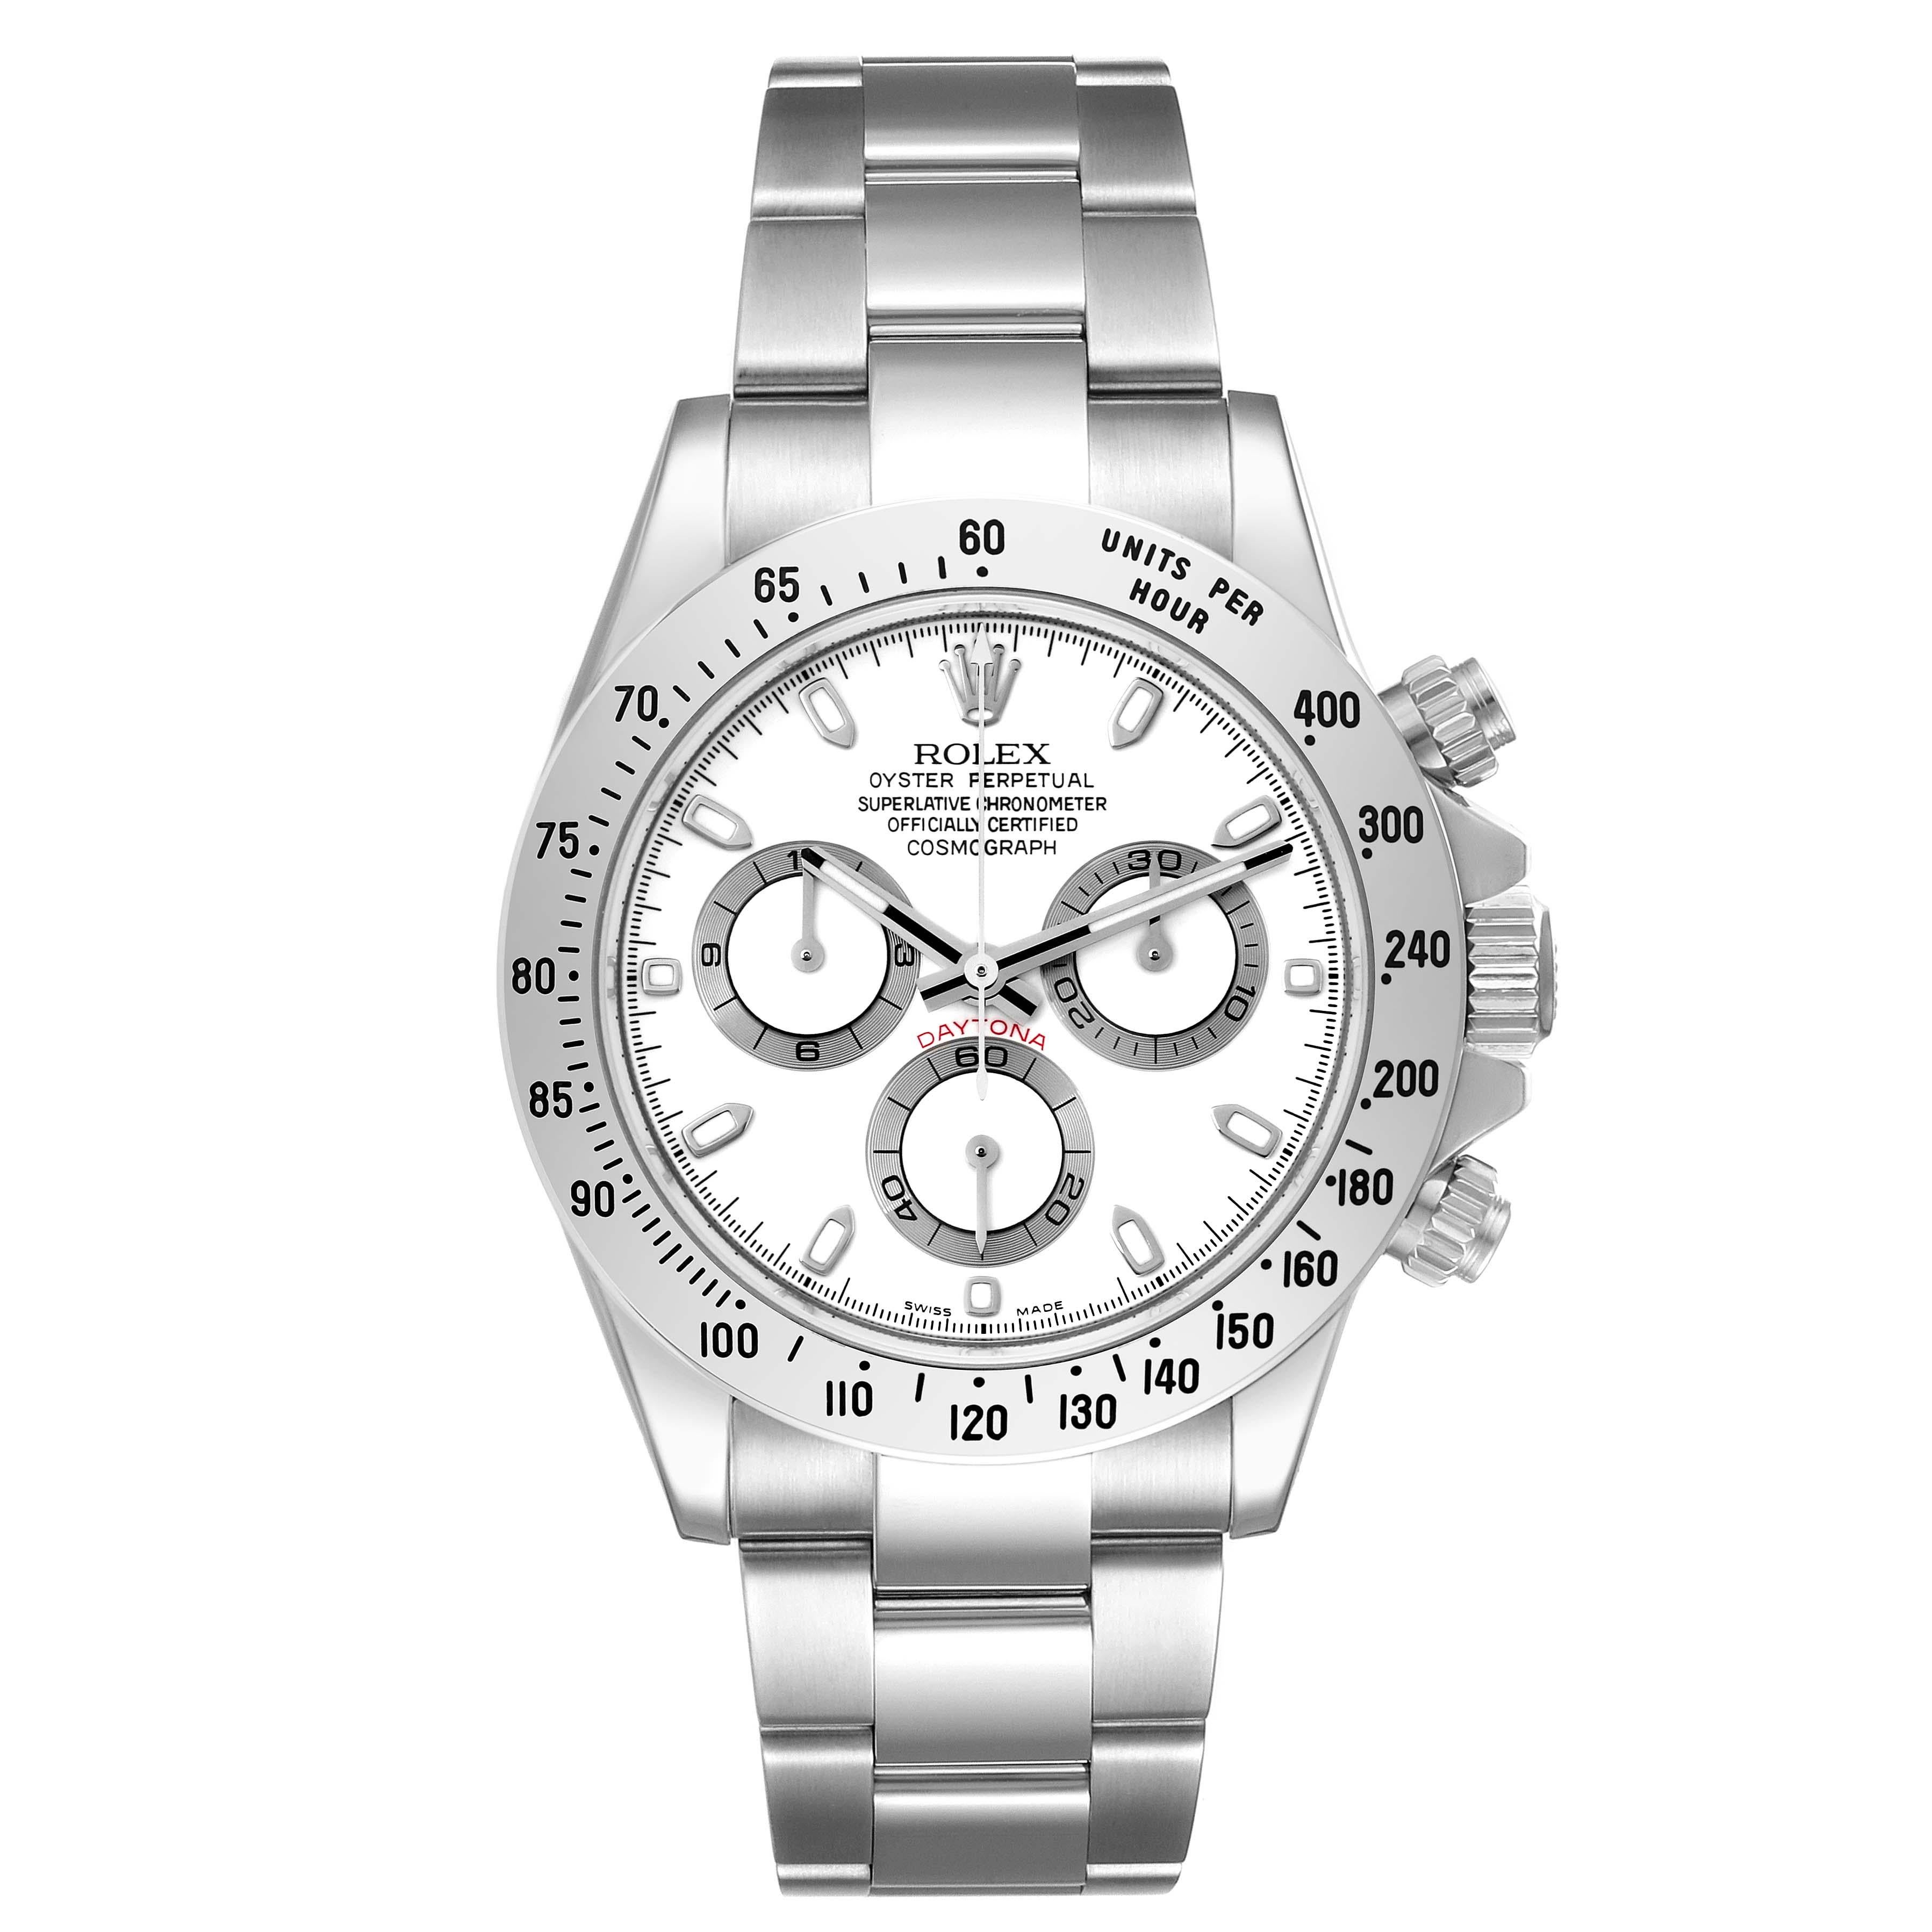 Rolex Daytona White Dial Chronograph Steel Mens Watch 116520 Box Card. Officially certified chronometer self-winding Chronograph movement. Stainless steel case 40.0 mm in diameter. Special screw-down push buttons. Stainless steel tachymeter engraved